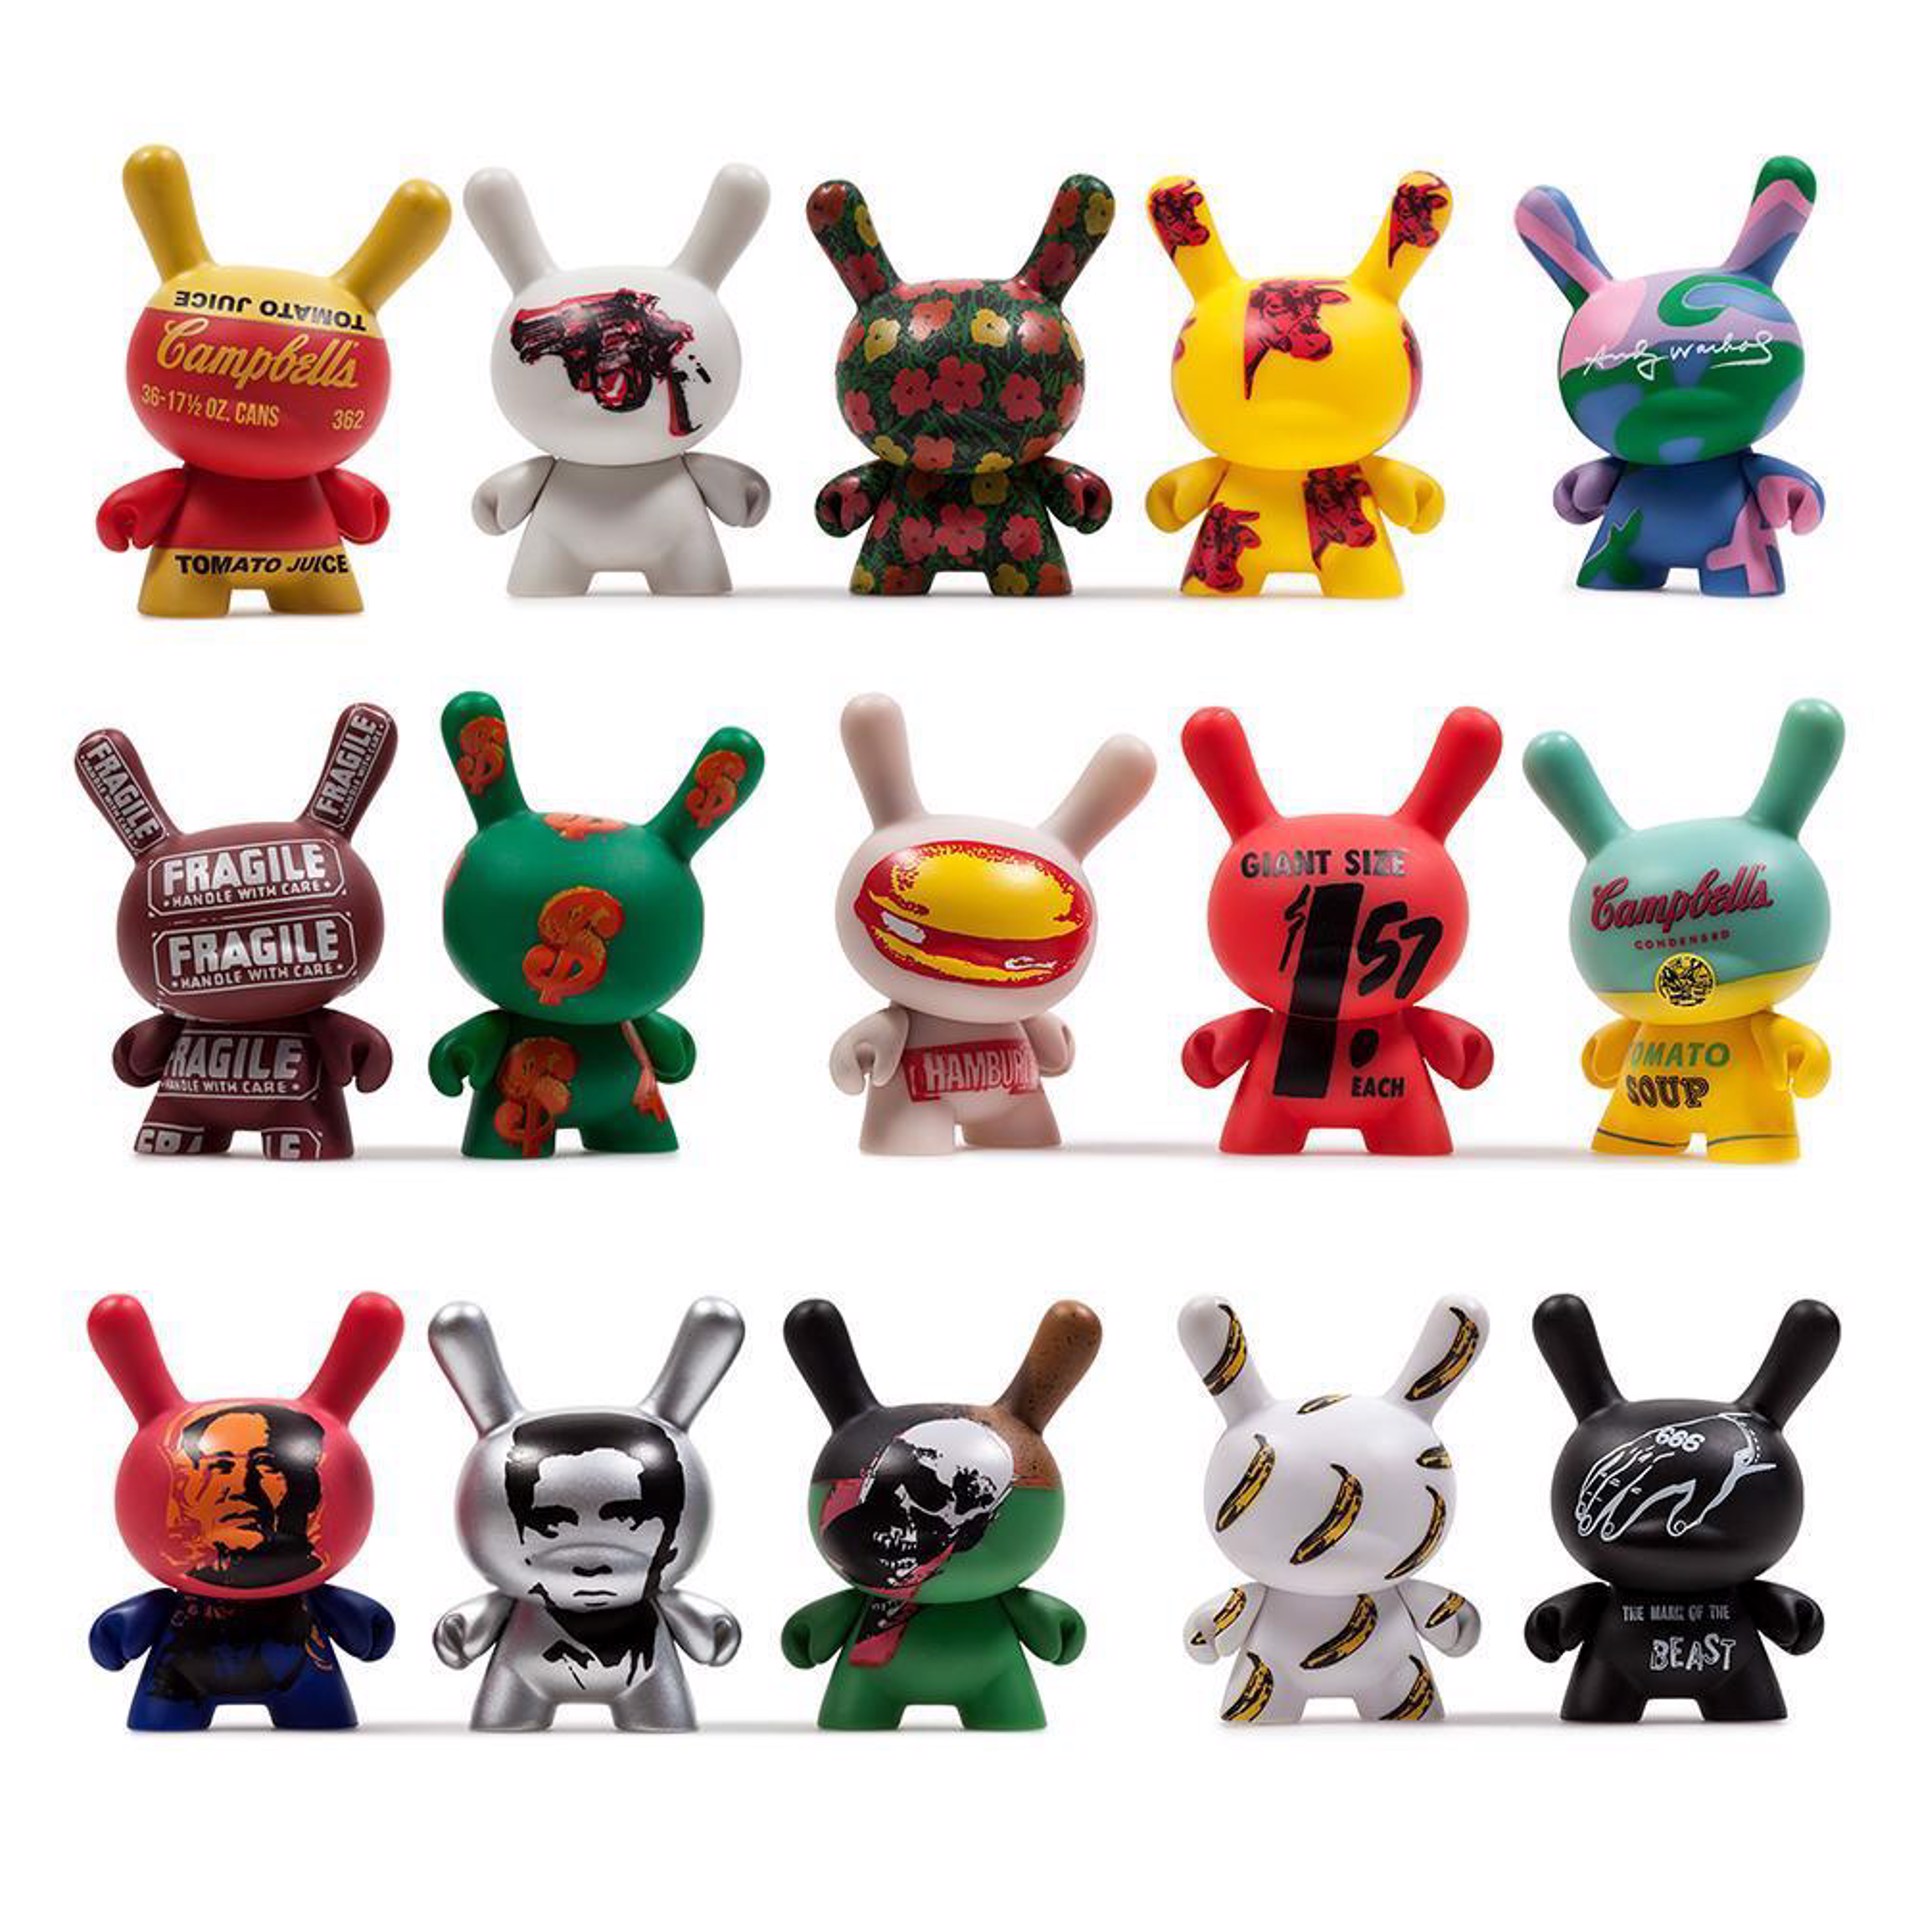 3" Andy Warhol Dunny Series 2 by Andy Warhol